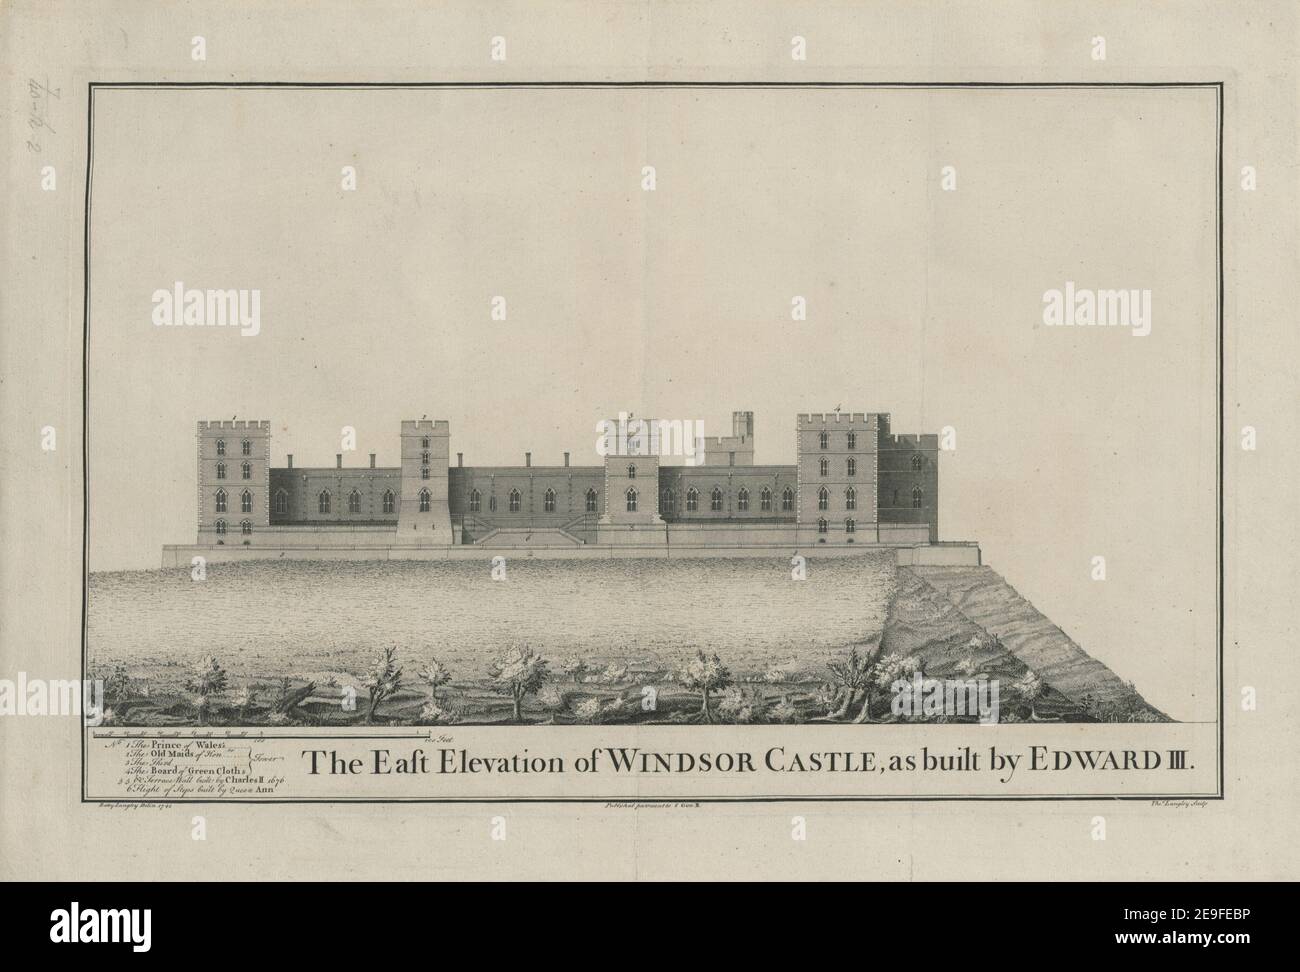 The East Elevation of WINDSOR CASTLE, as built by EDWARD III. Author  Langley, Batty 7.40.k.2 Place of publication: [London], Publisher: Published pursuant to 8 Geo II. Date of publication: 1743.  Item type: 1 print: Medium: engraving and etching Dimensions: platemark 29.4 x x 45.8 cm  Former owner: George III, King of Great Britain, 1738-1820 Stock Photo